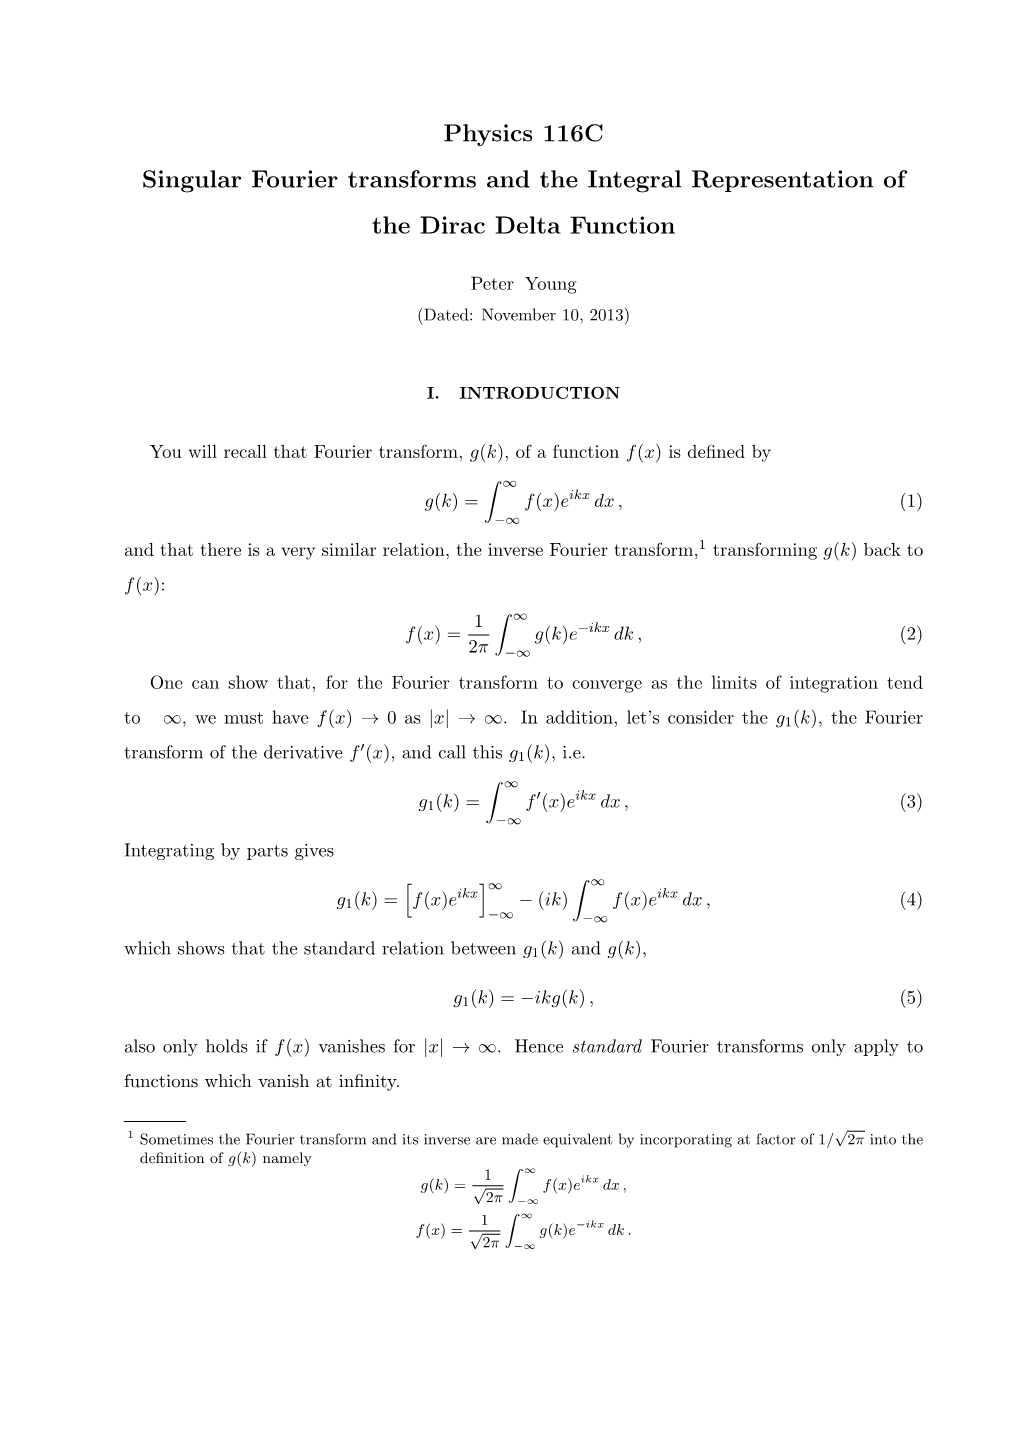 Singular Fourier Transforms and the Integral Representation of the Dirac Delta Function